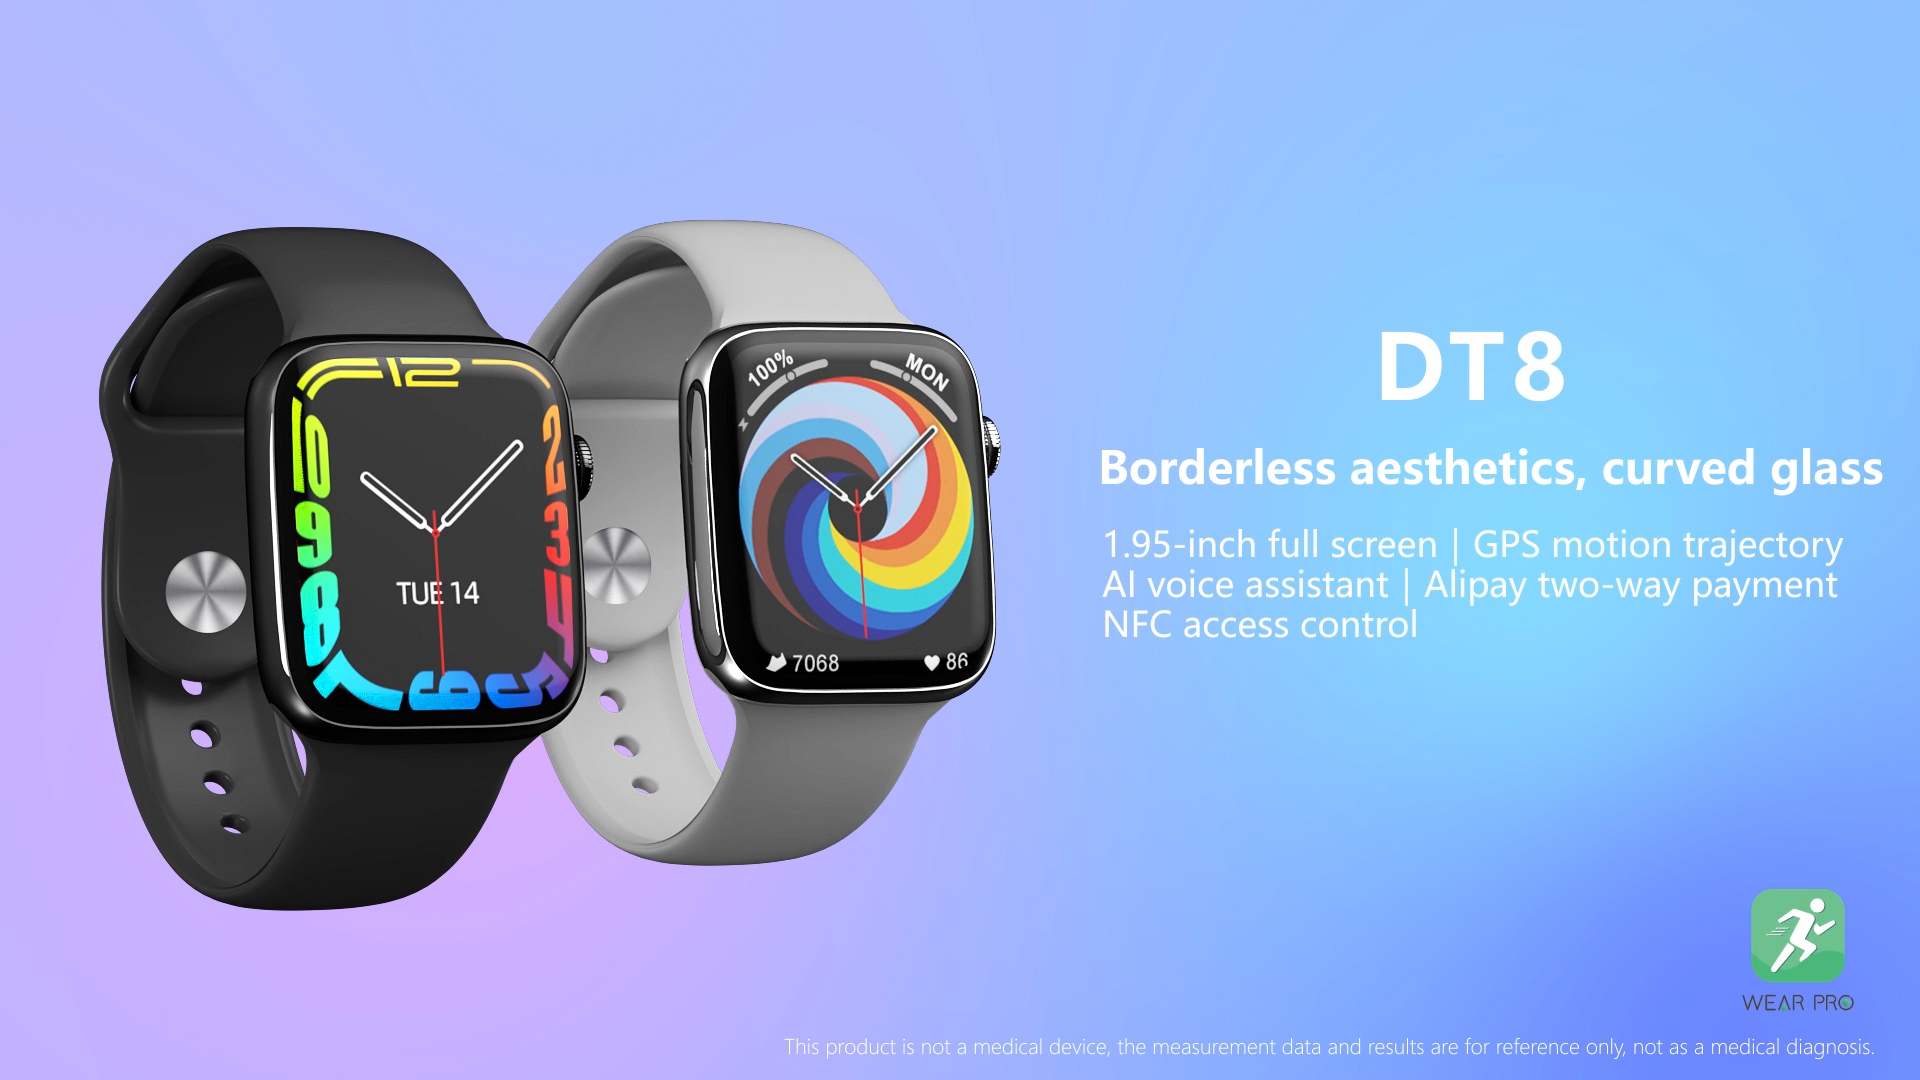 Smartwatch DT8 is coming!